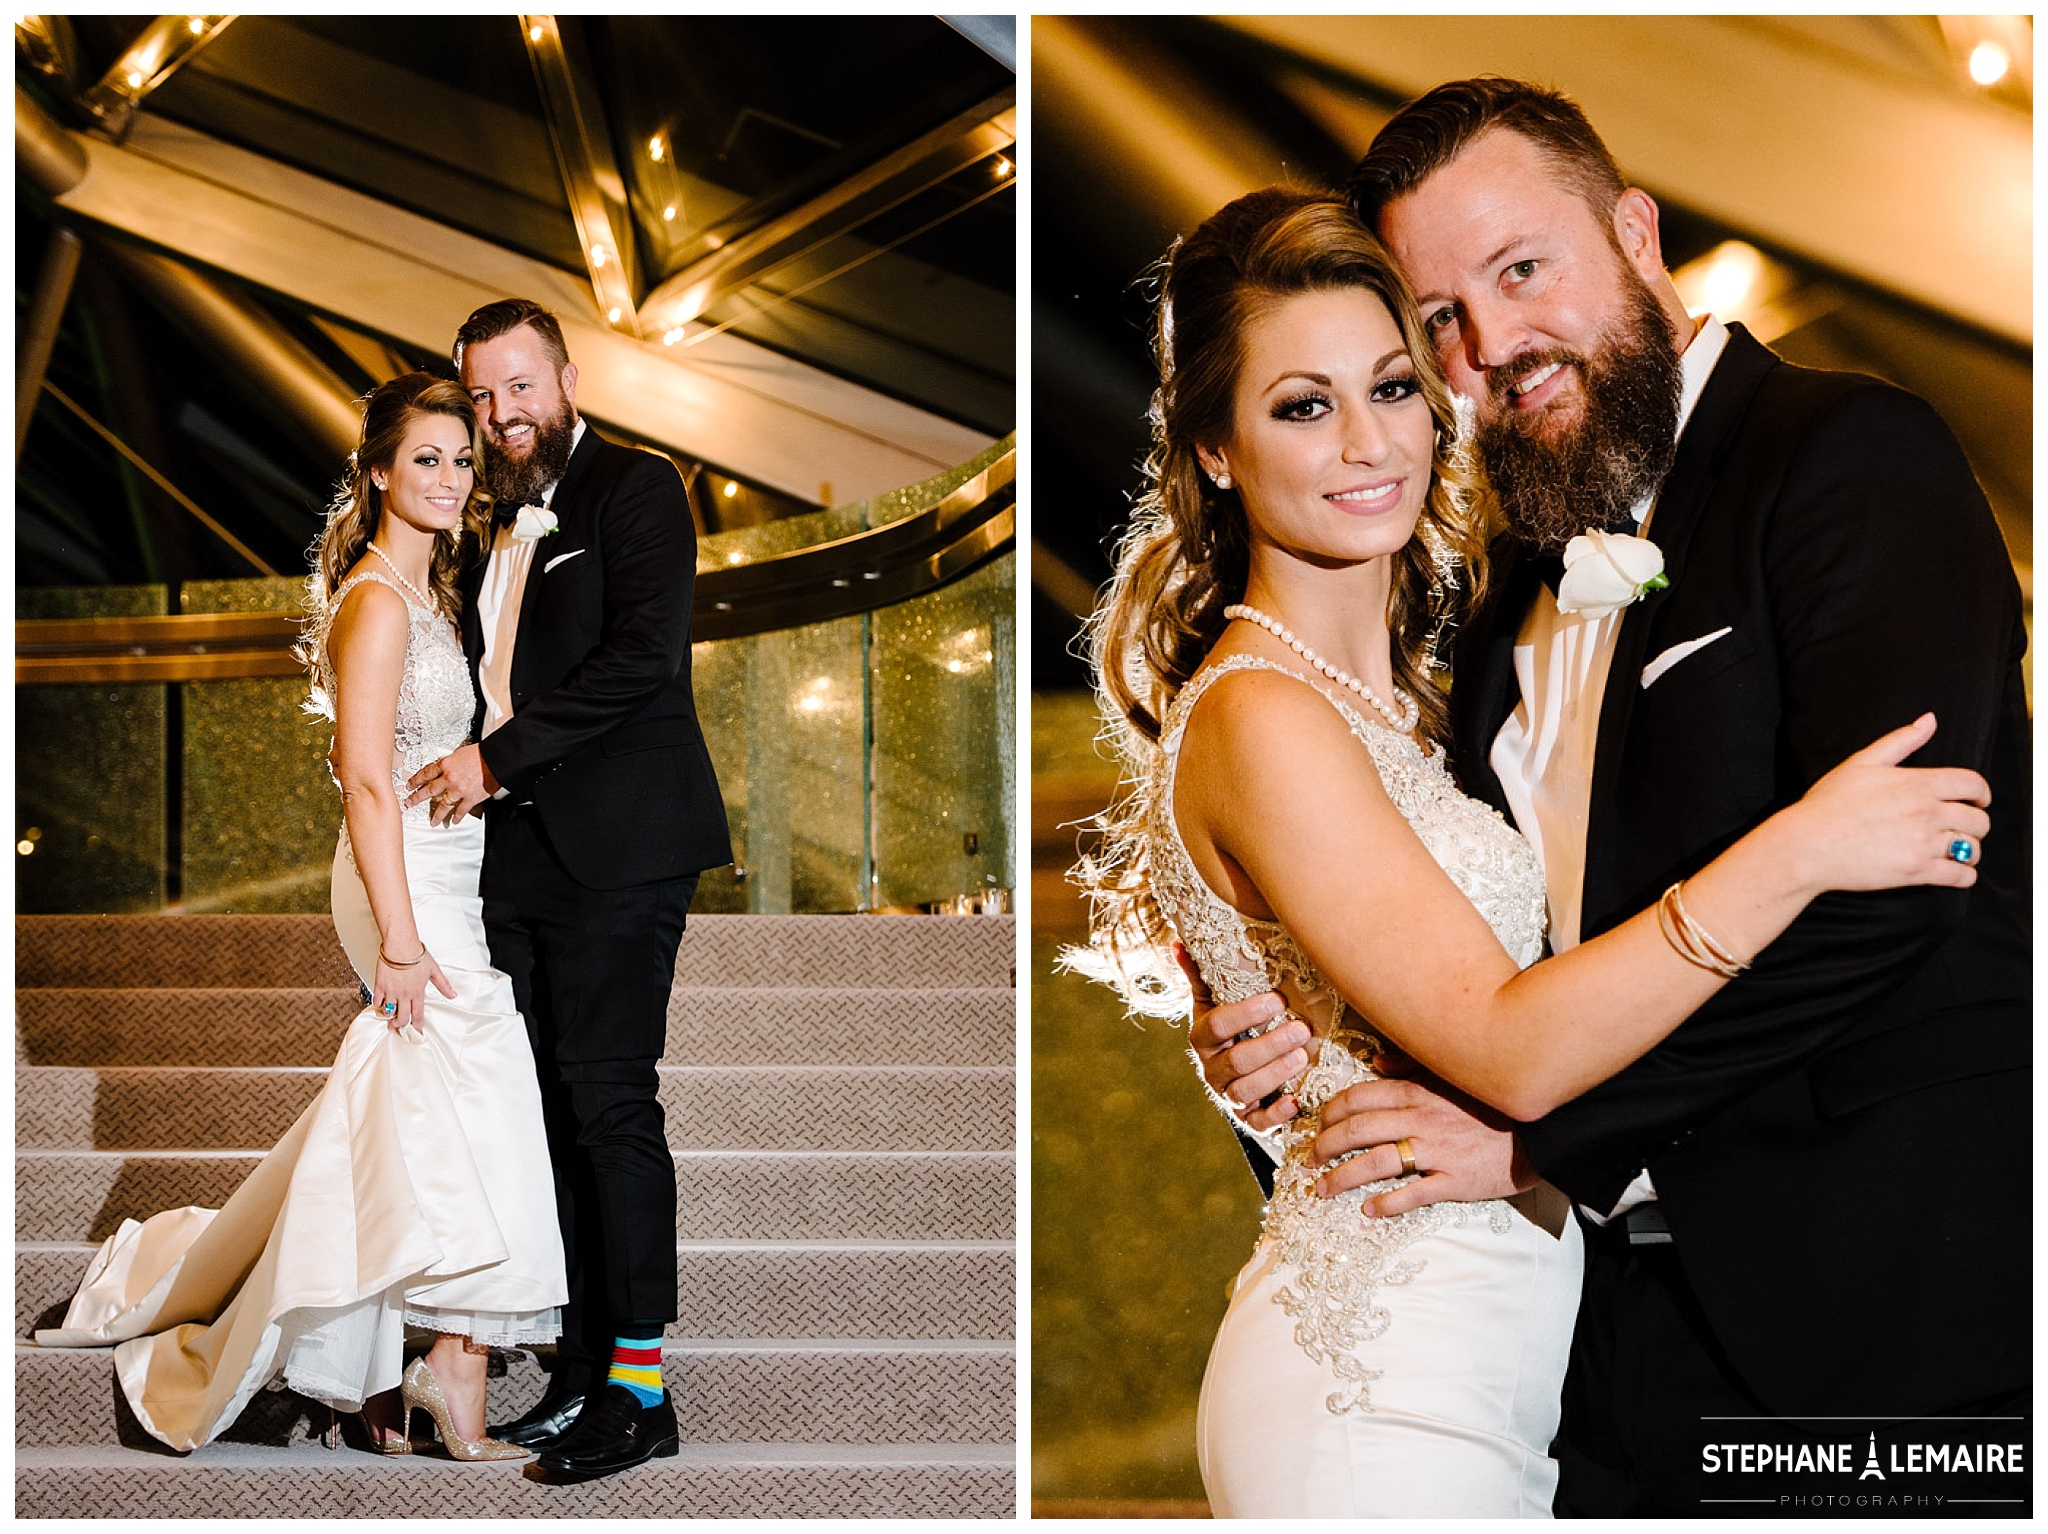 Portrait of Bride and Groom at Spencer theater wedding in Ruidoso wedding reception by Stephane Lemaire Photography 